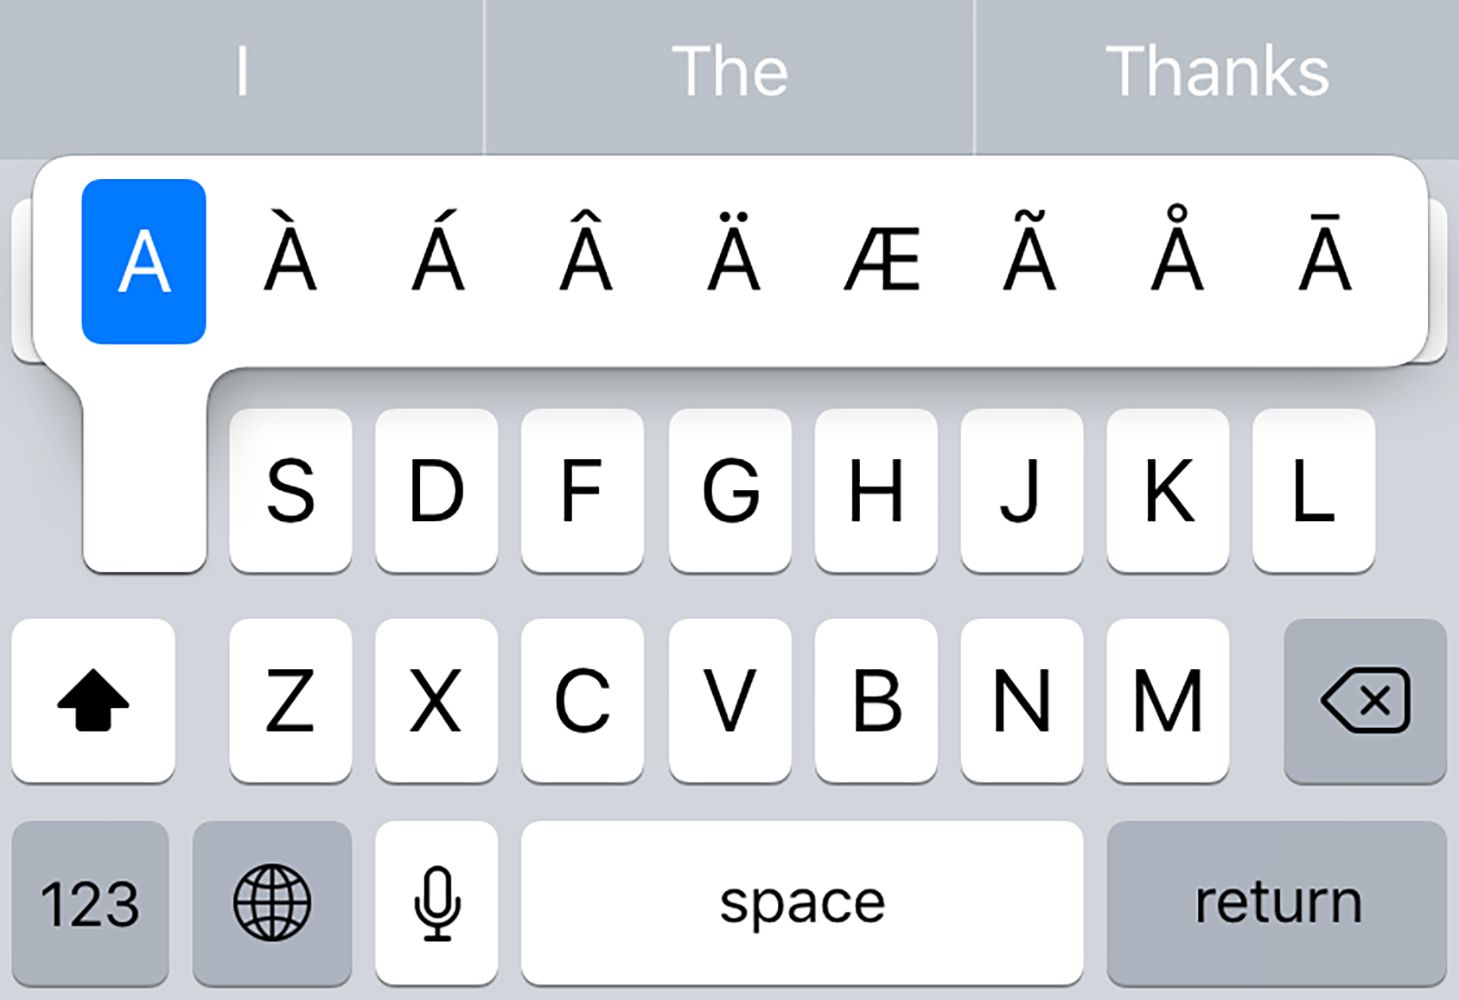 how to add an e with an accent mark on keypad